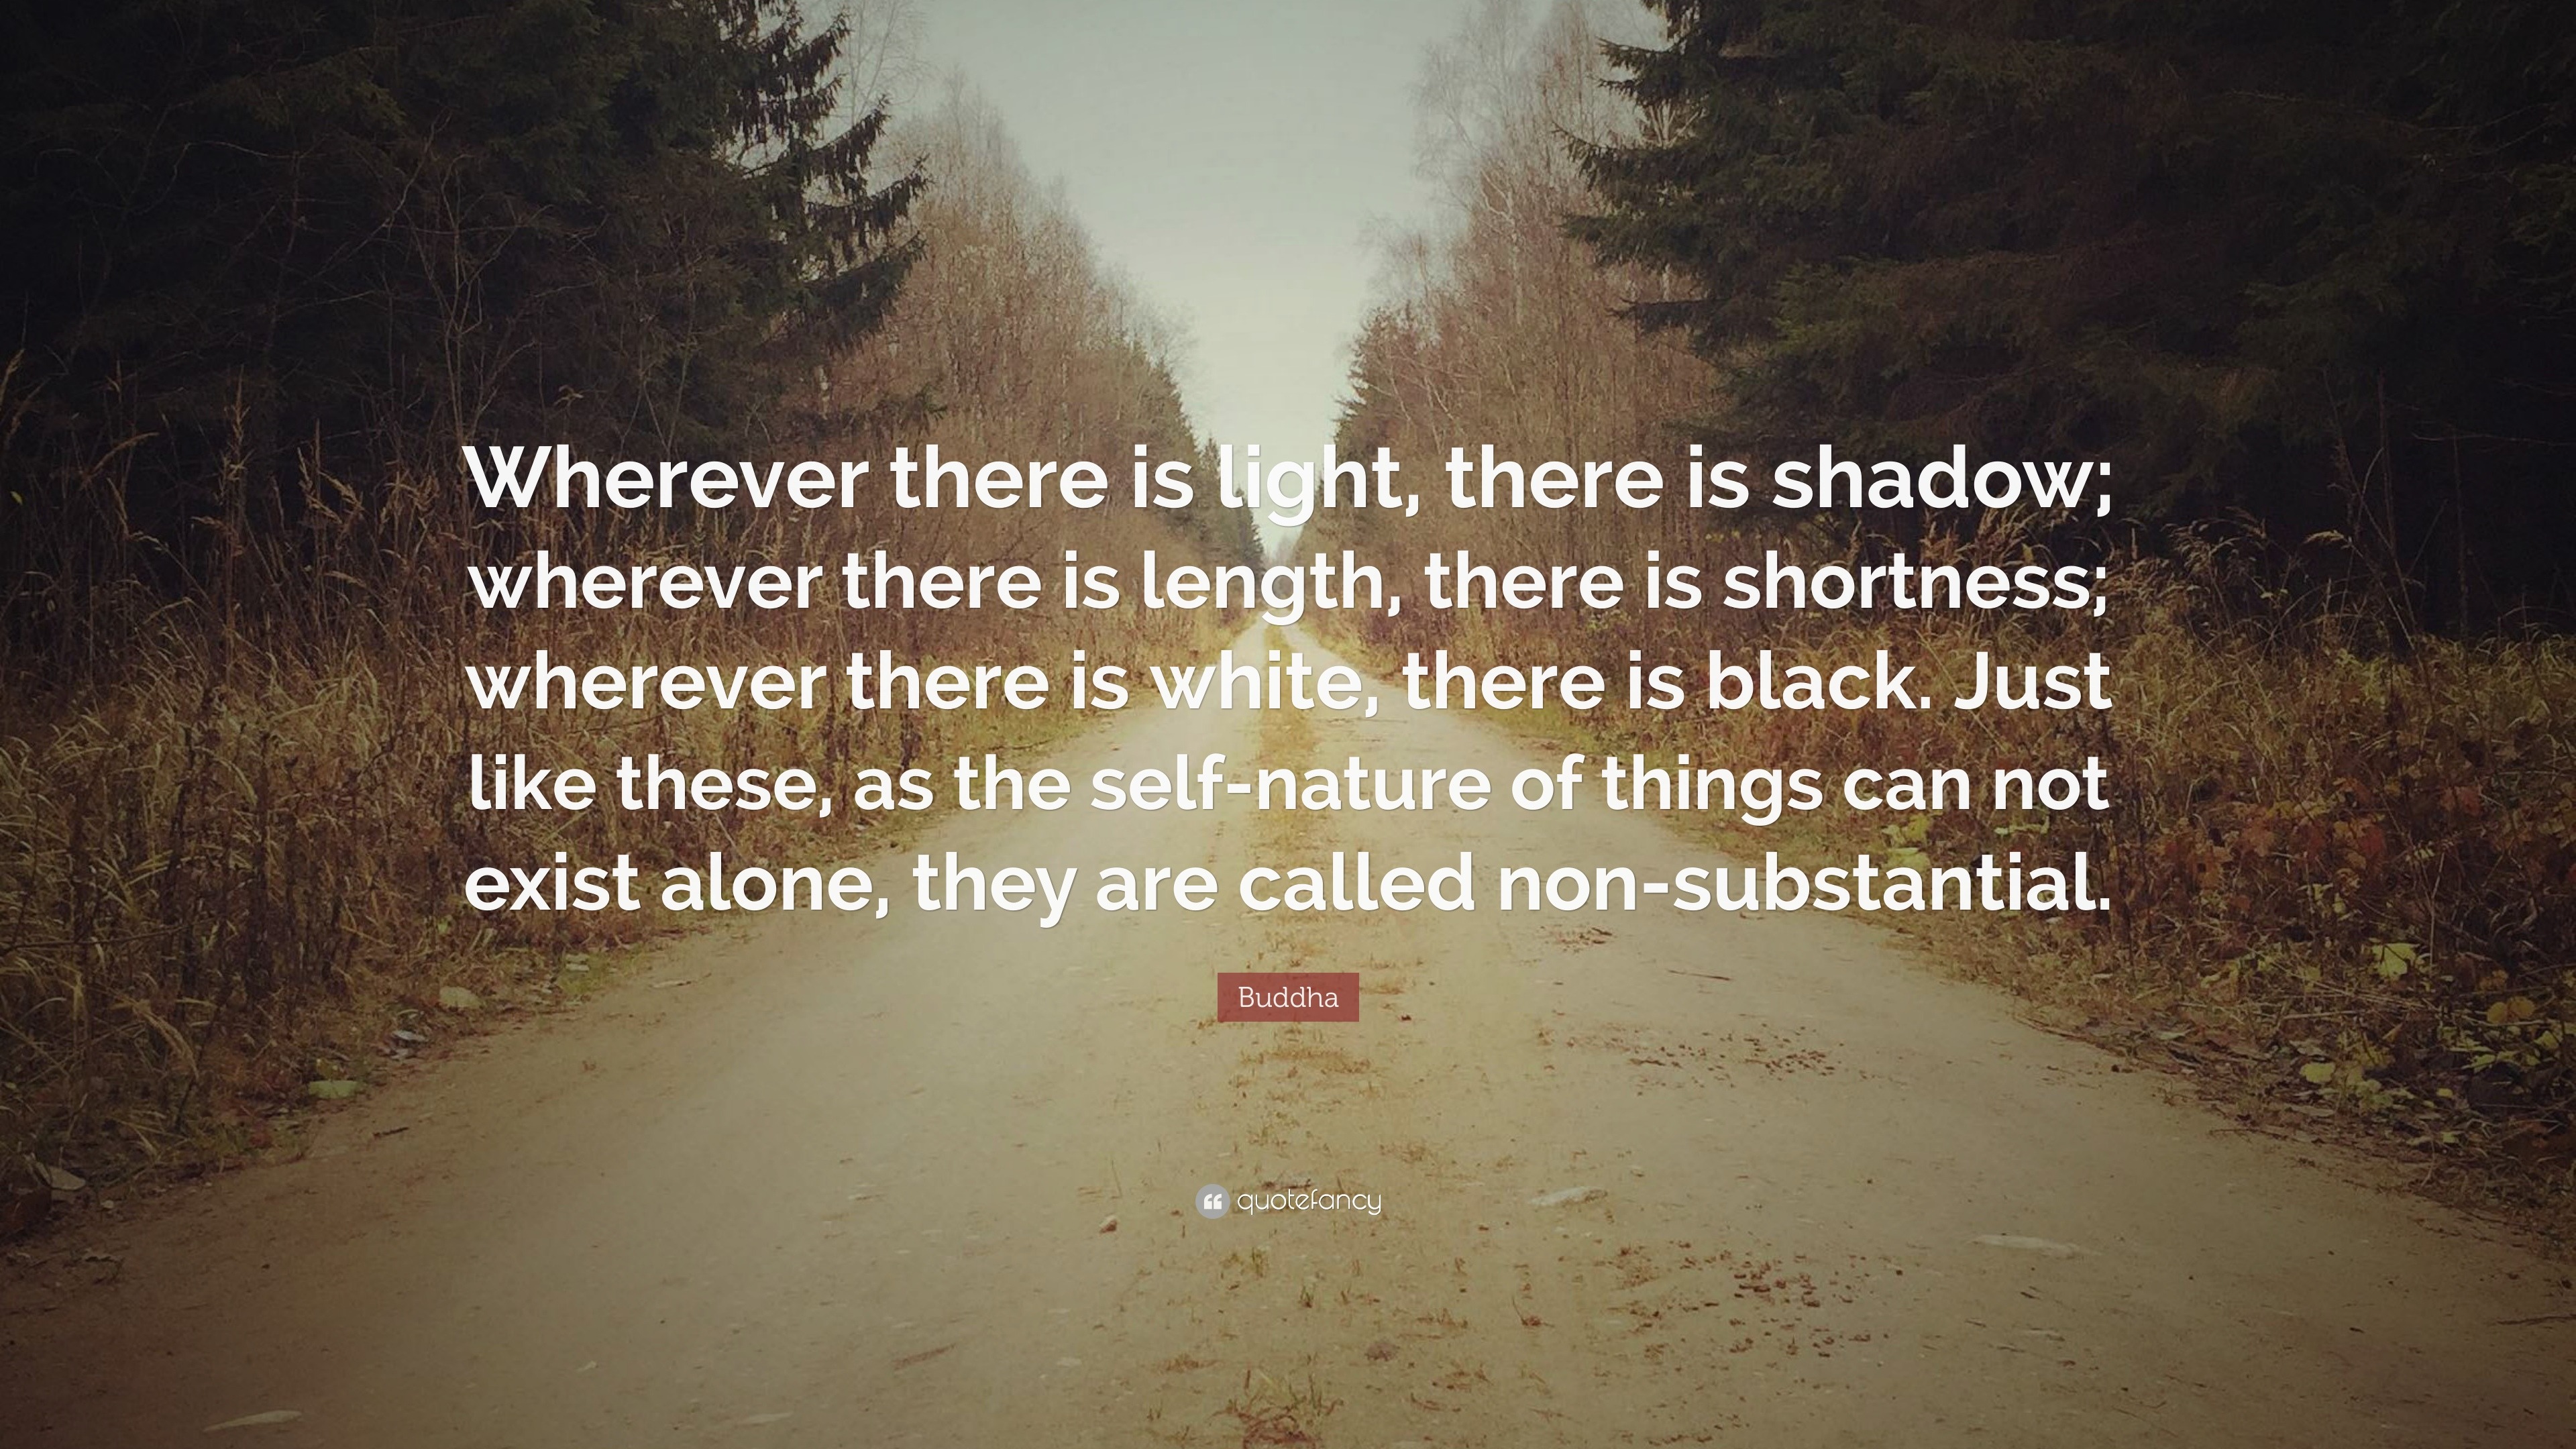 Buddha Quote: “Wherever there is light, there is shadow; wherever there